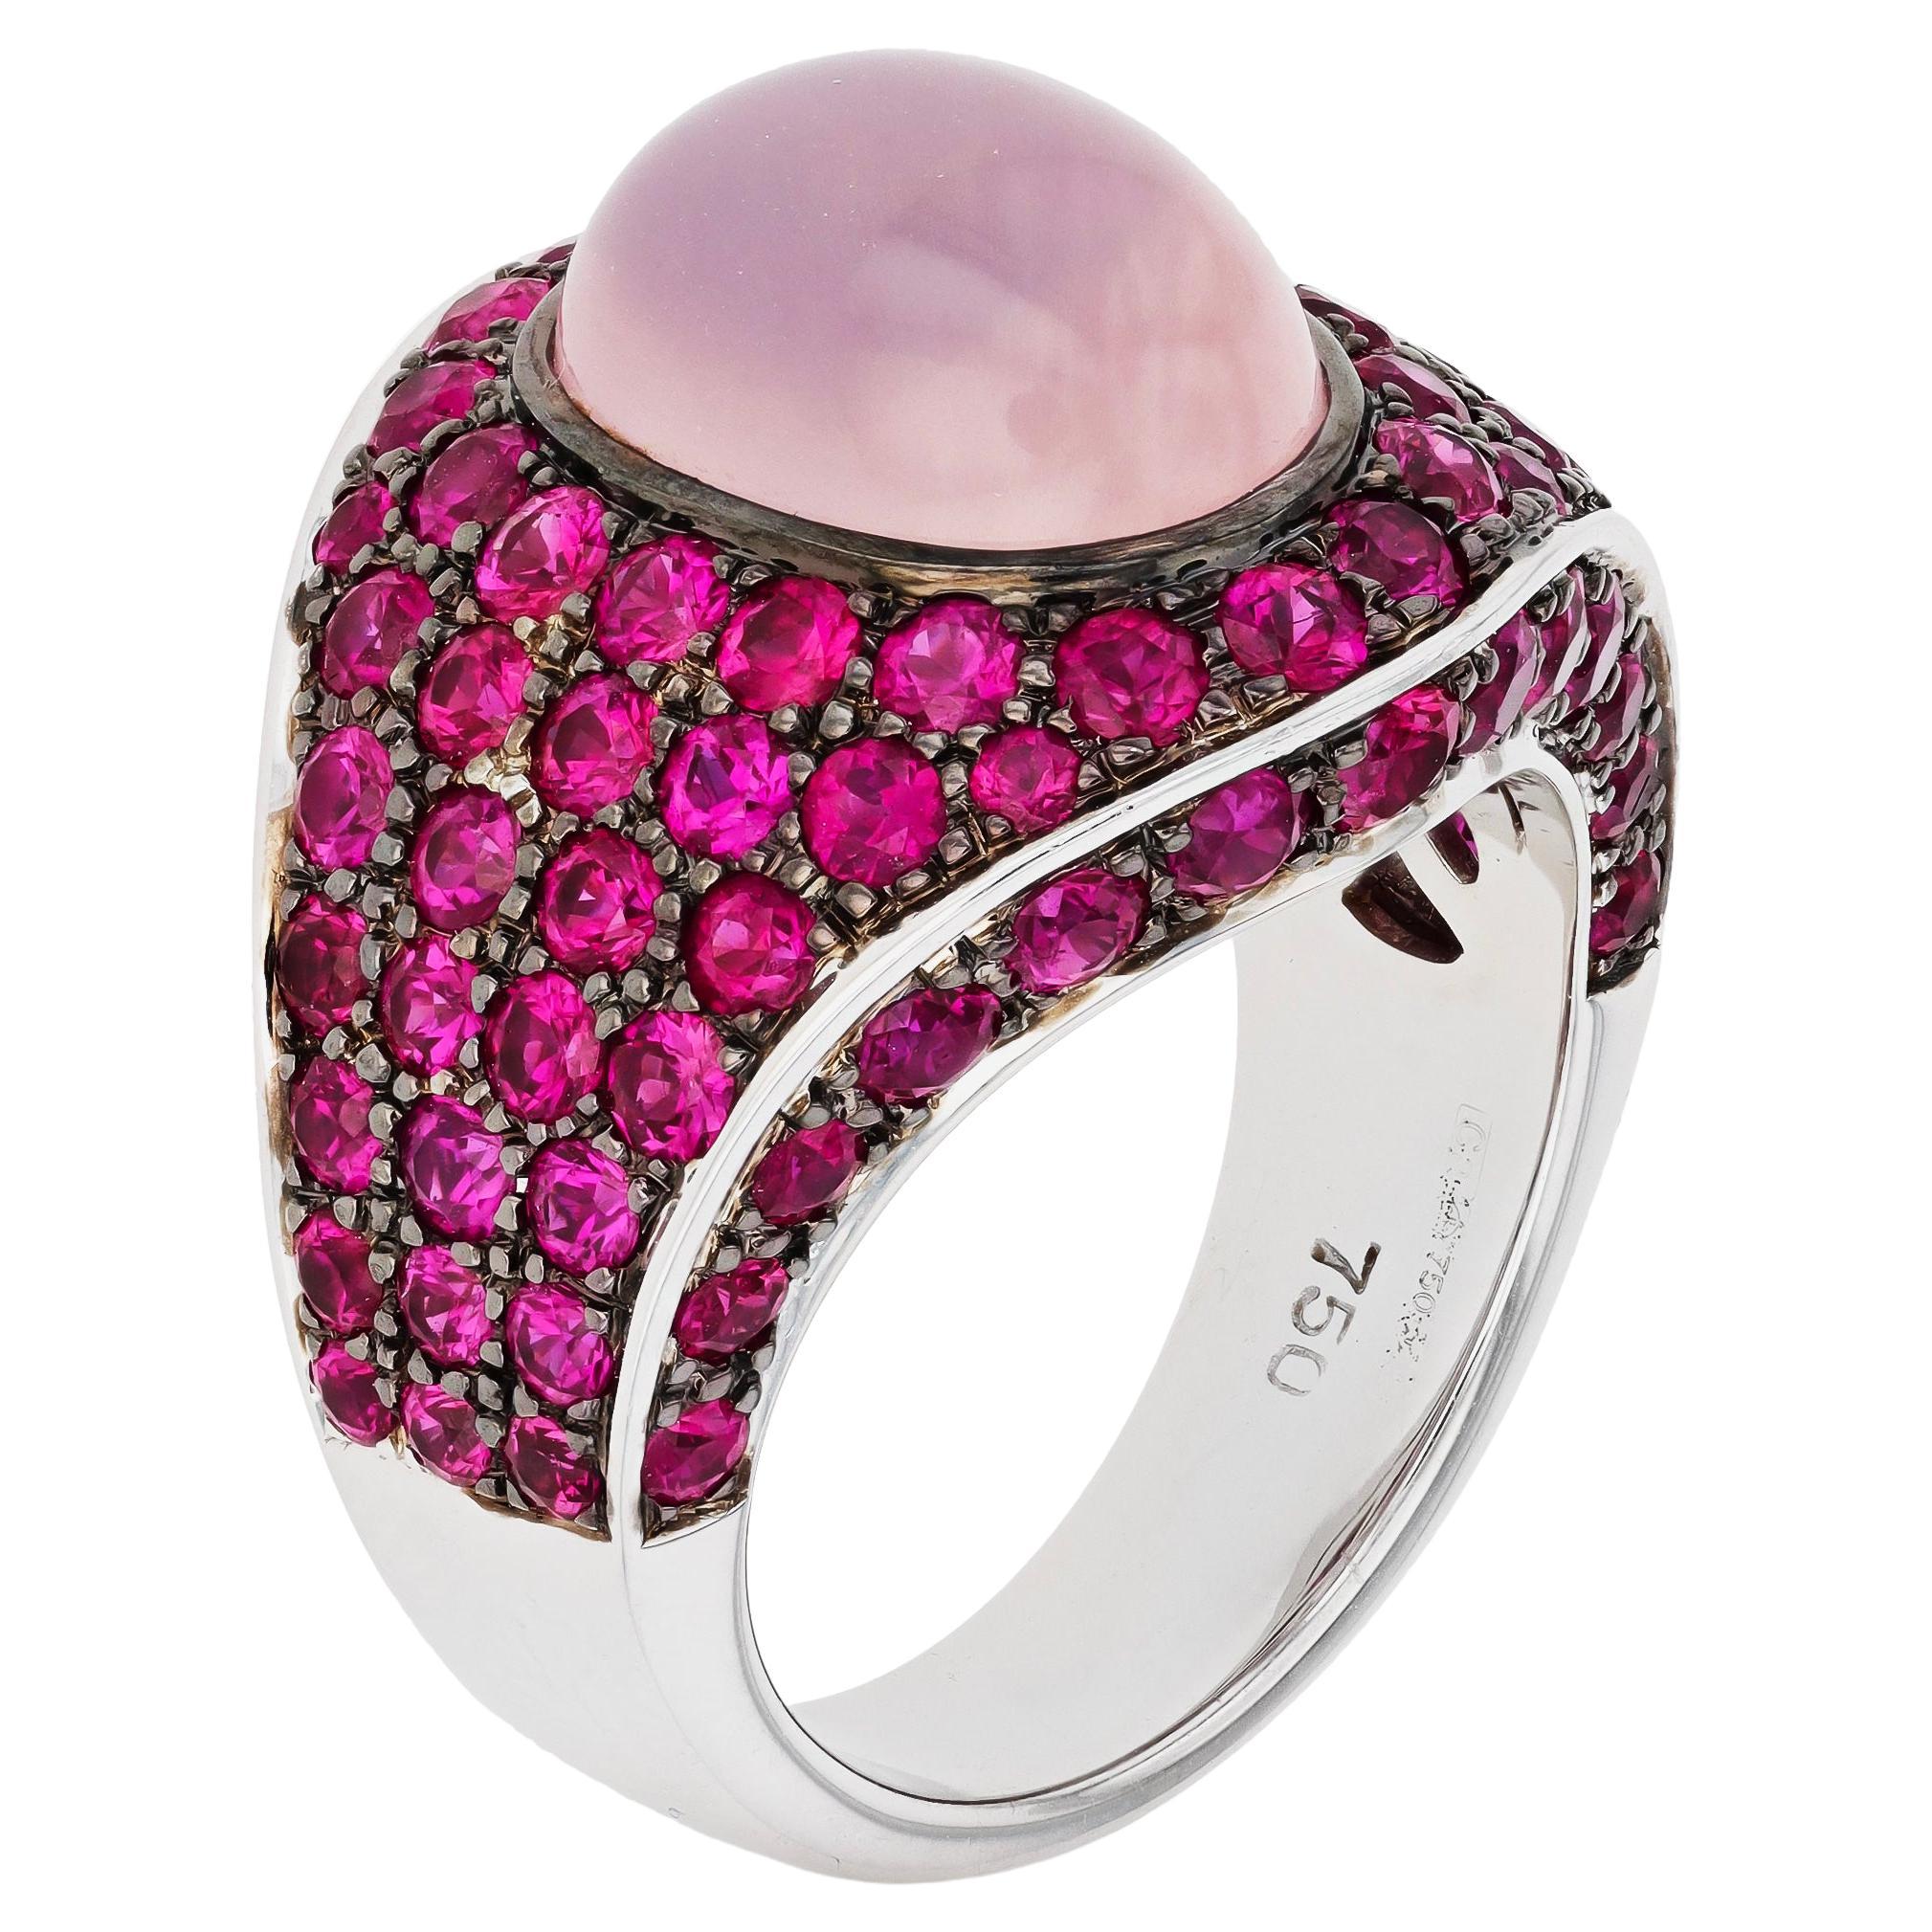 Roberto Coin 18K White Gold, Pink Quartz, and Ruby Ring sz 7